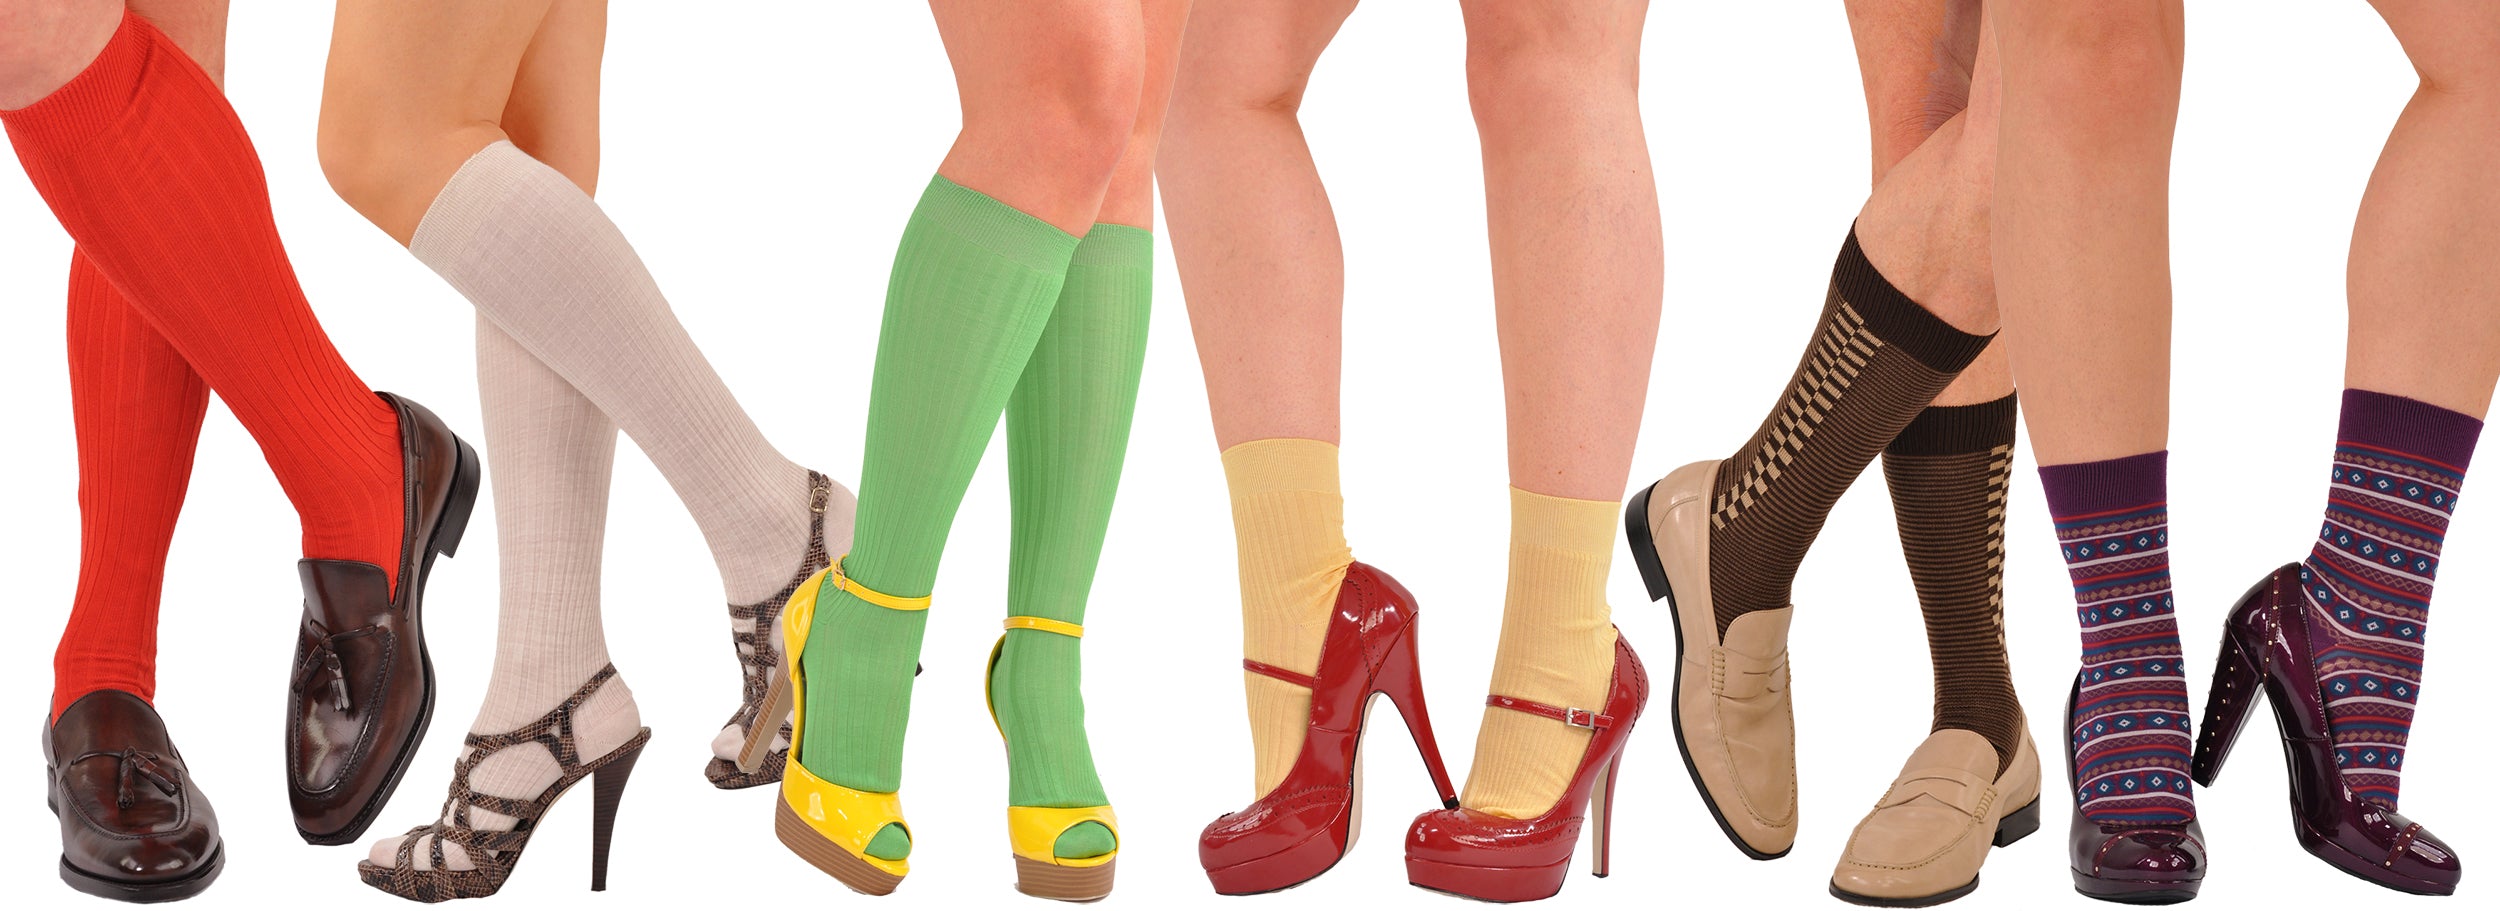 Do Your Socks Stay Up? Over-the-Calf/Knee-High vs Mid-Calf/Trouser